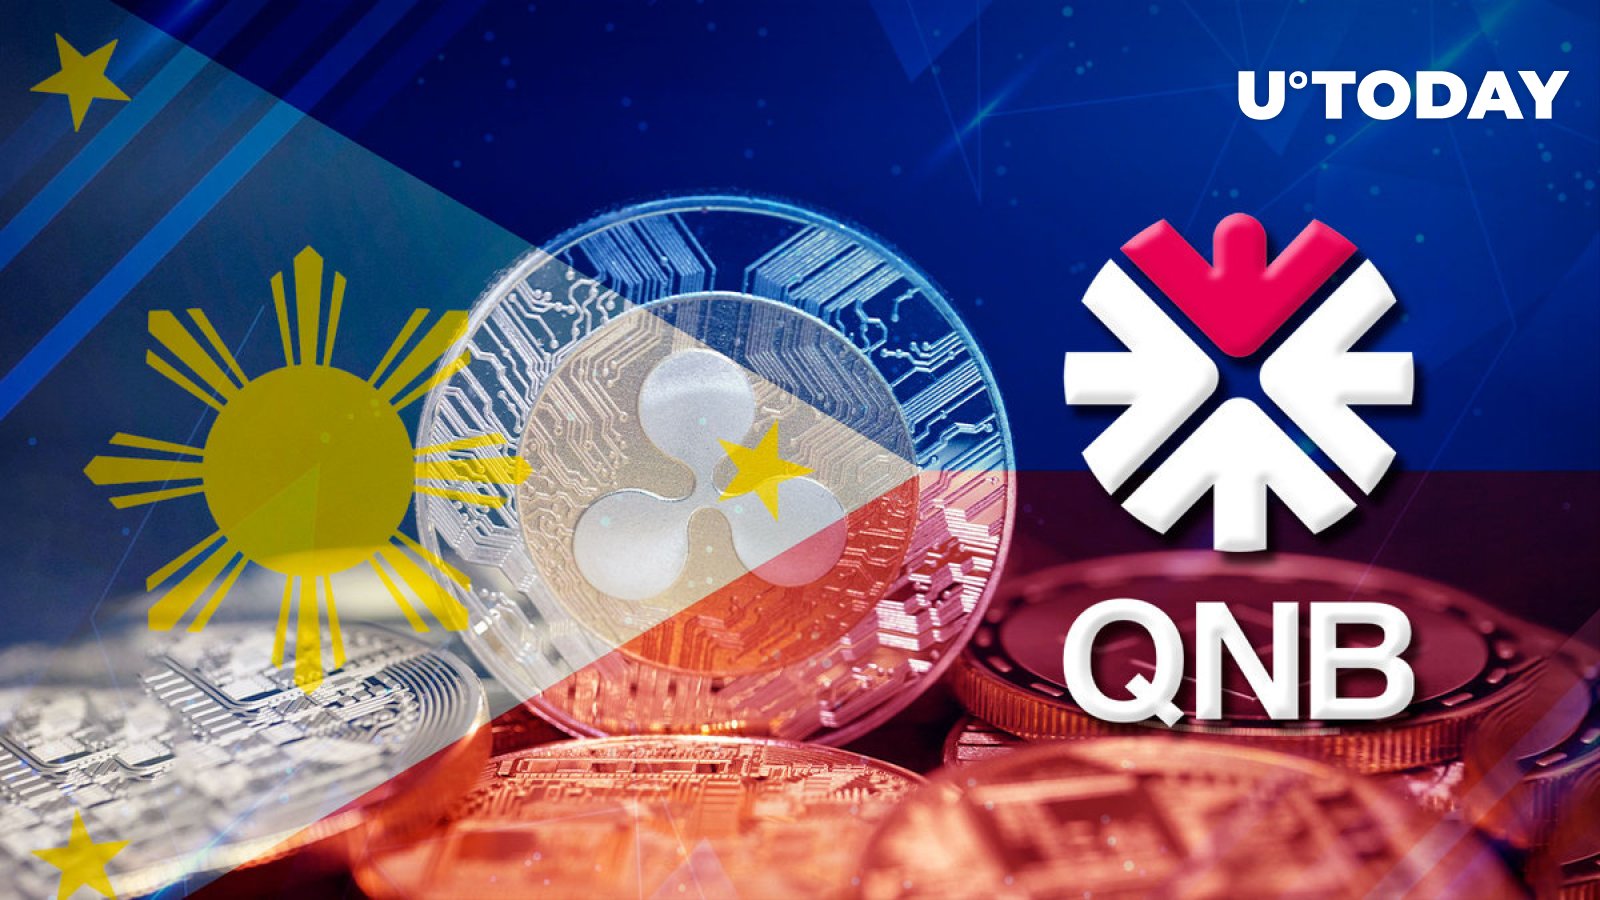 Ripple Expands Its Remittance Technology to Philippines via QNB in First-of-Its-Kind Move